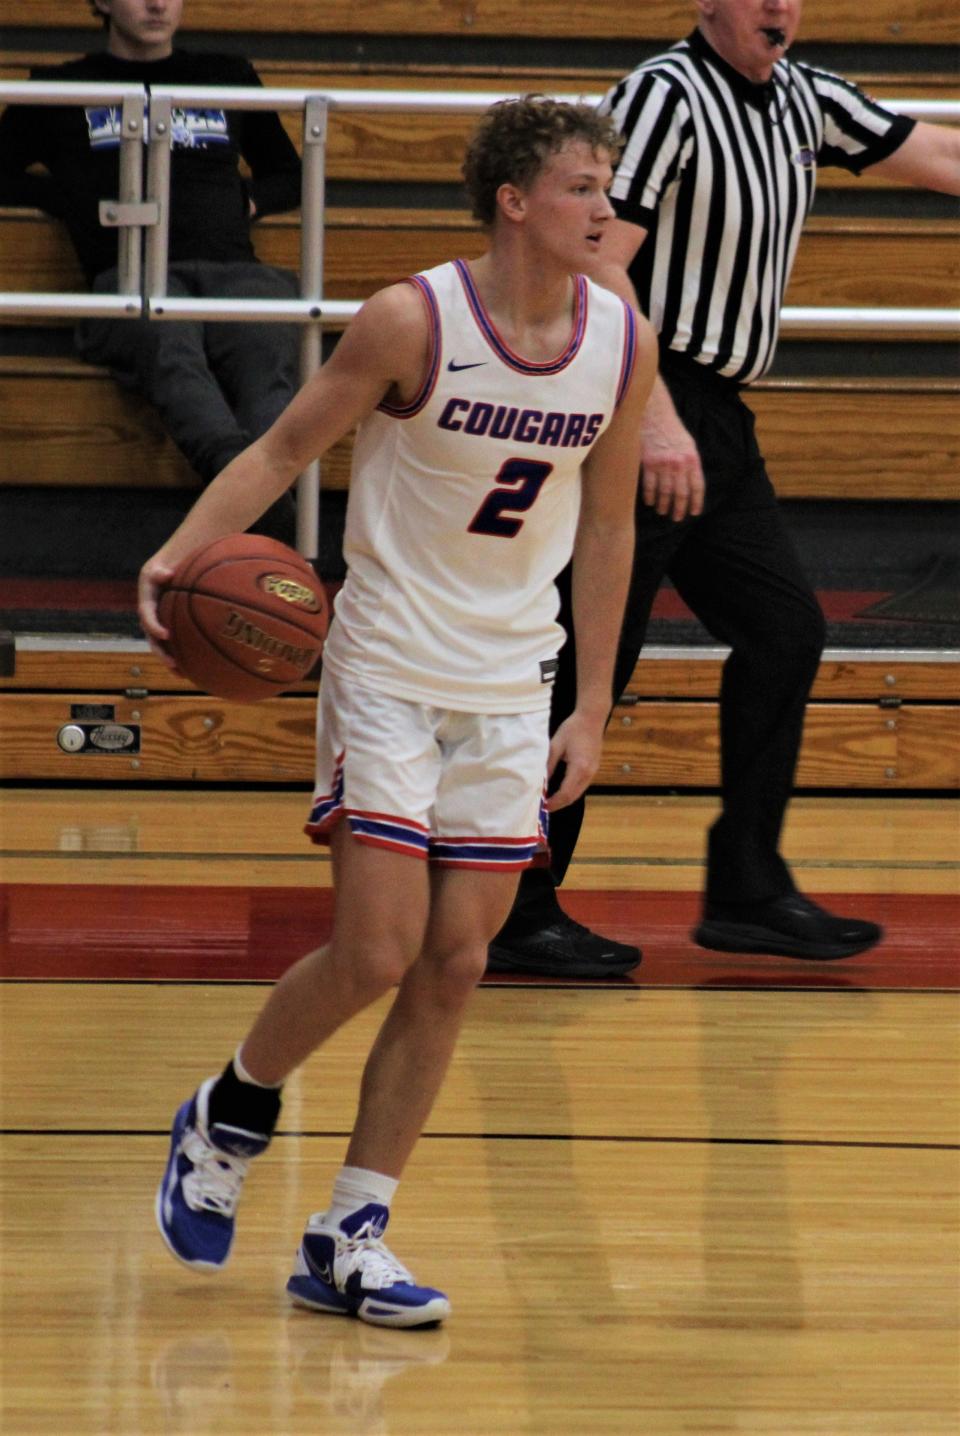 Conner senior Landen Hamilton is the Cougars' leading scorer. The Cougars last won a Ninth Region title in 1993, but are in contention this year.